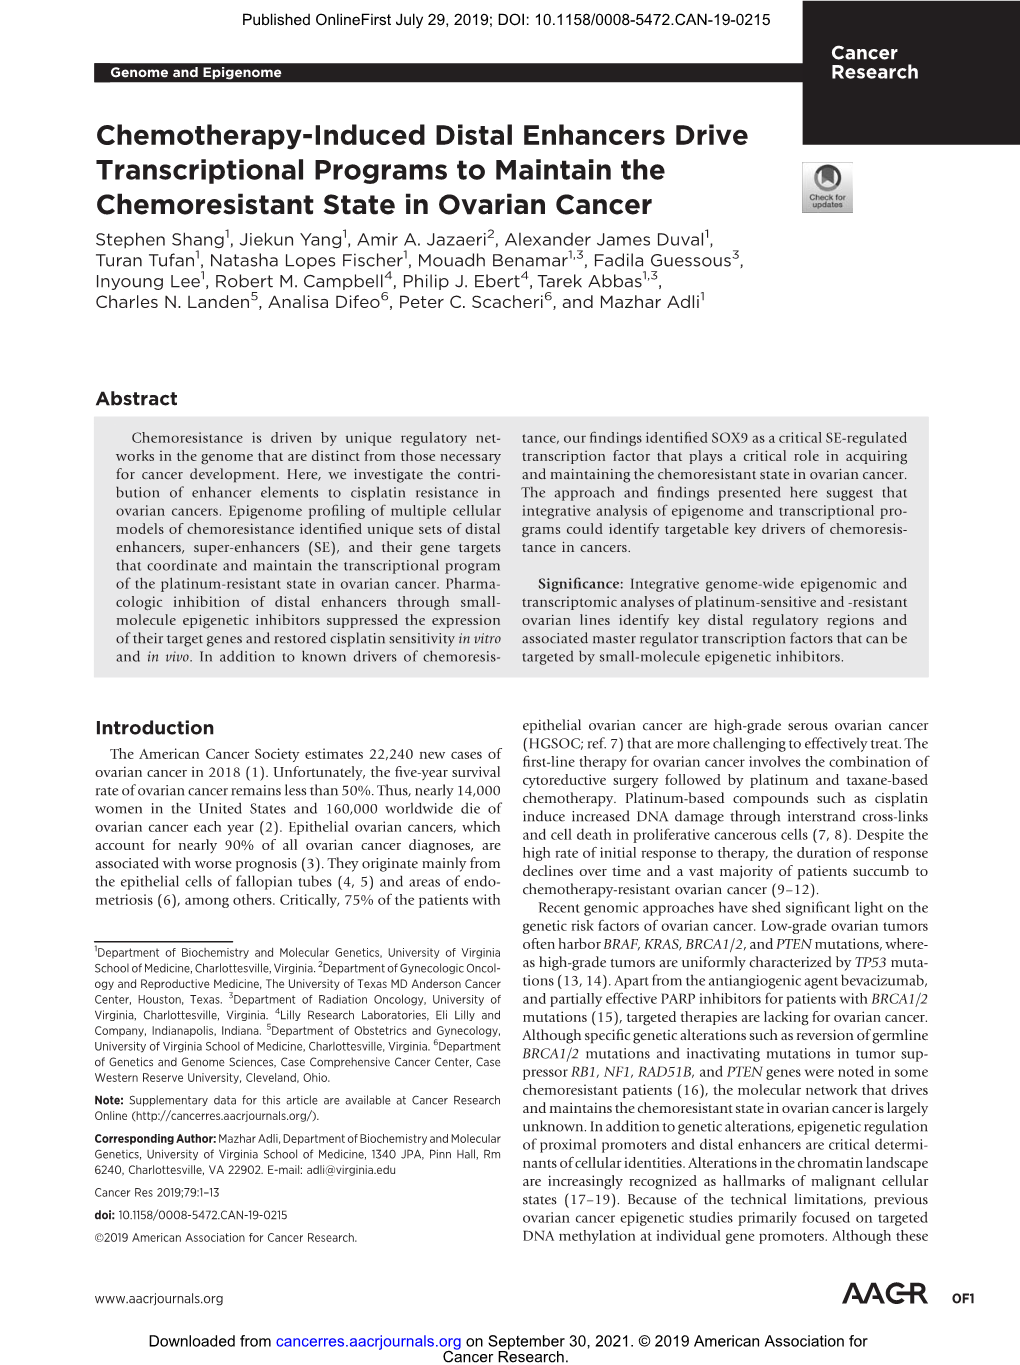 Chemotherapy-Induced Distal Enhancers Drive Transcriptional Programs to Maintain the Chemoresistant State in Ovarian Cancer Stephen Shang1, Jiekun Yang1, Amir A